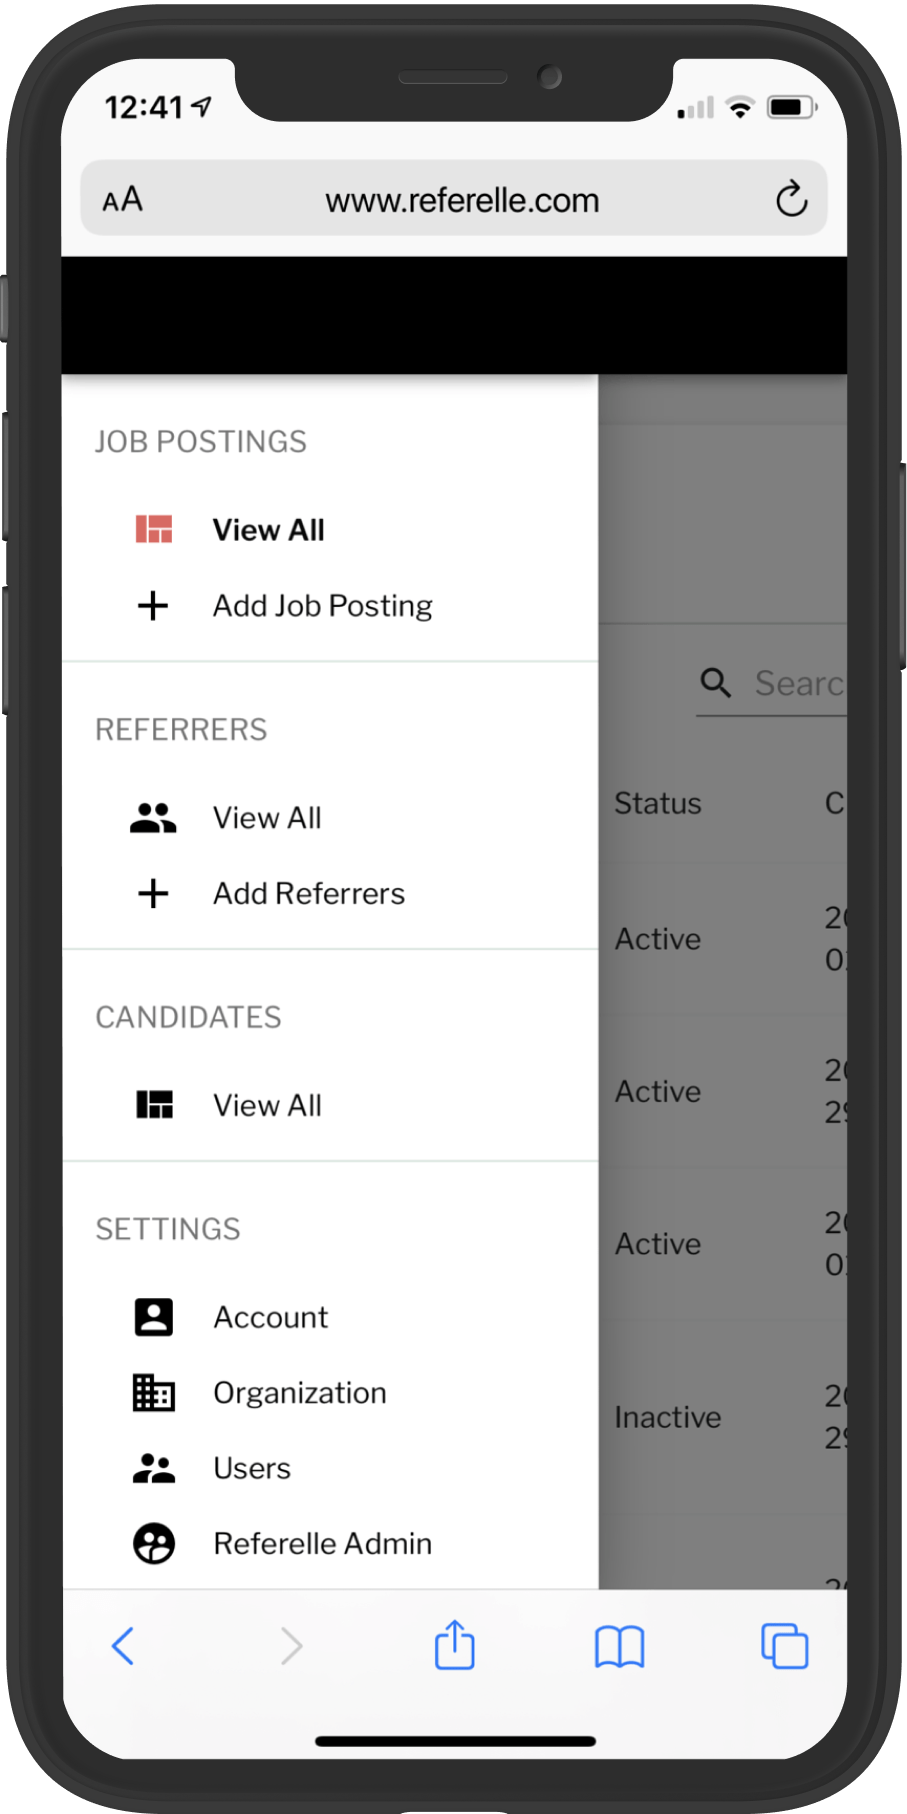 Screenshots of Referelle application on a phone